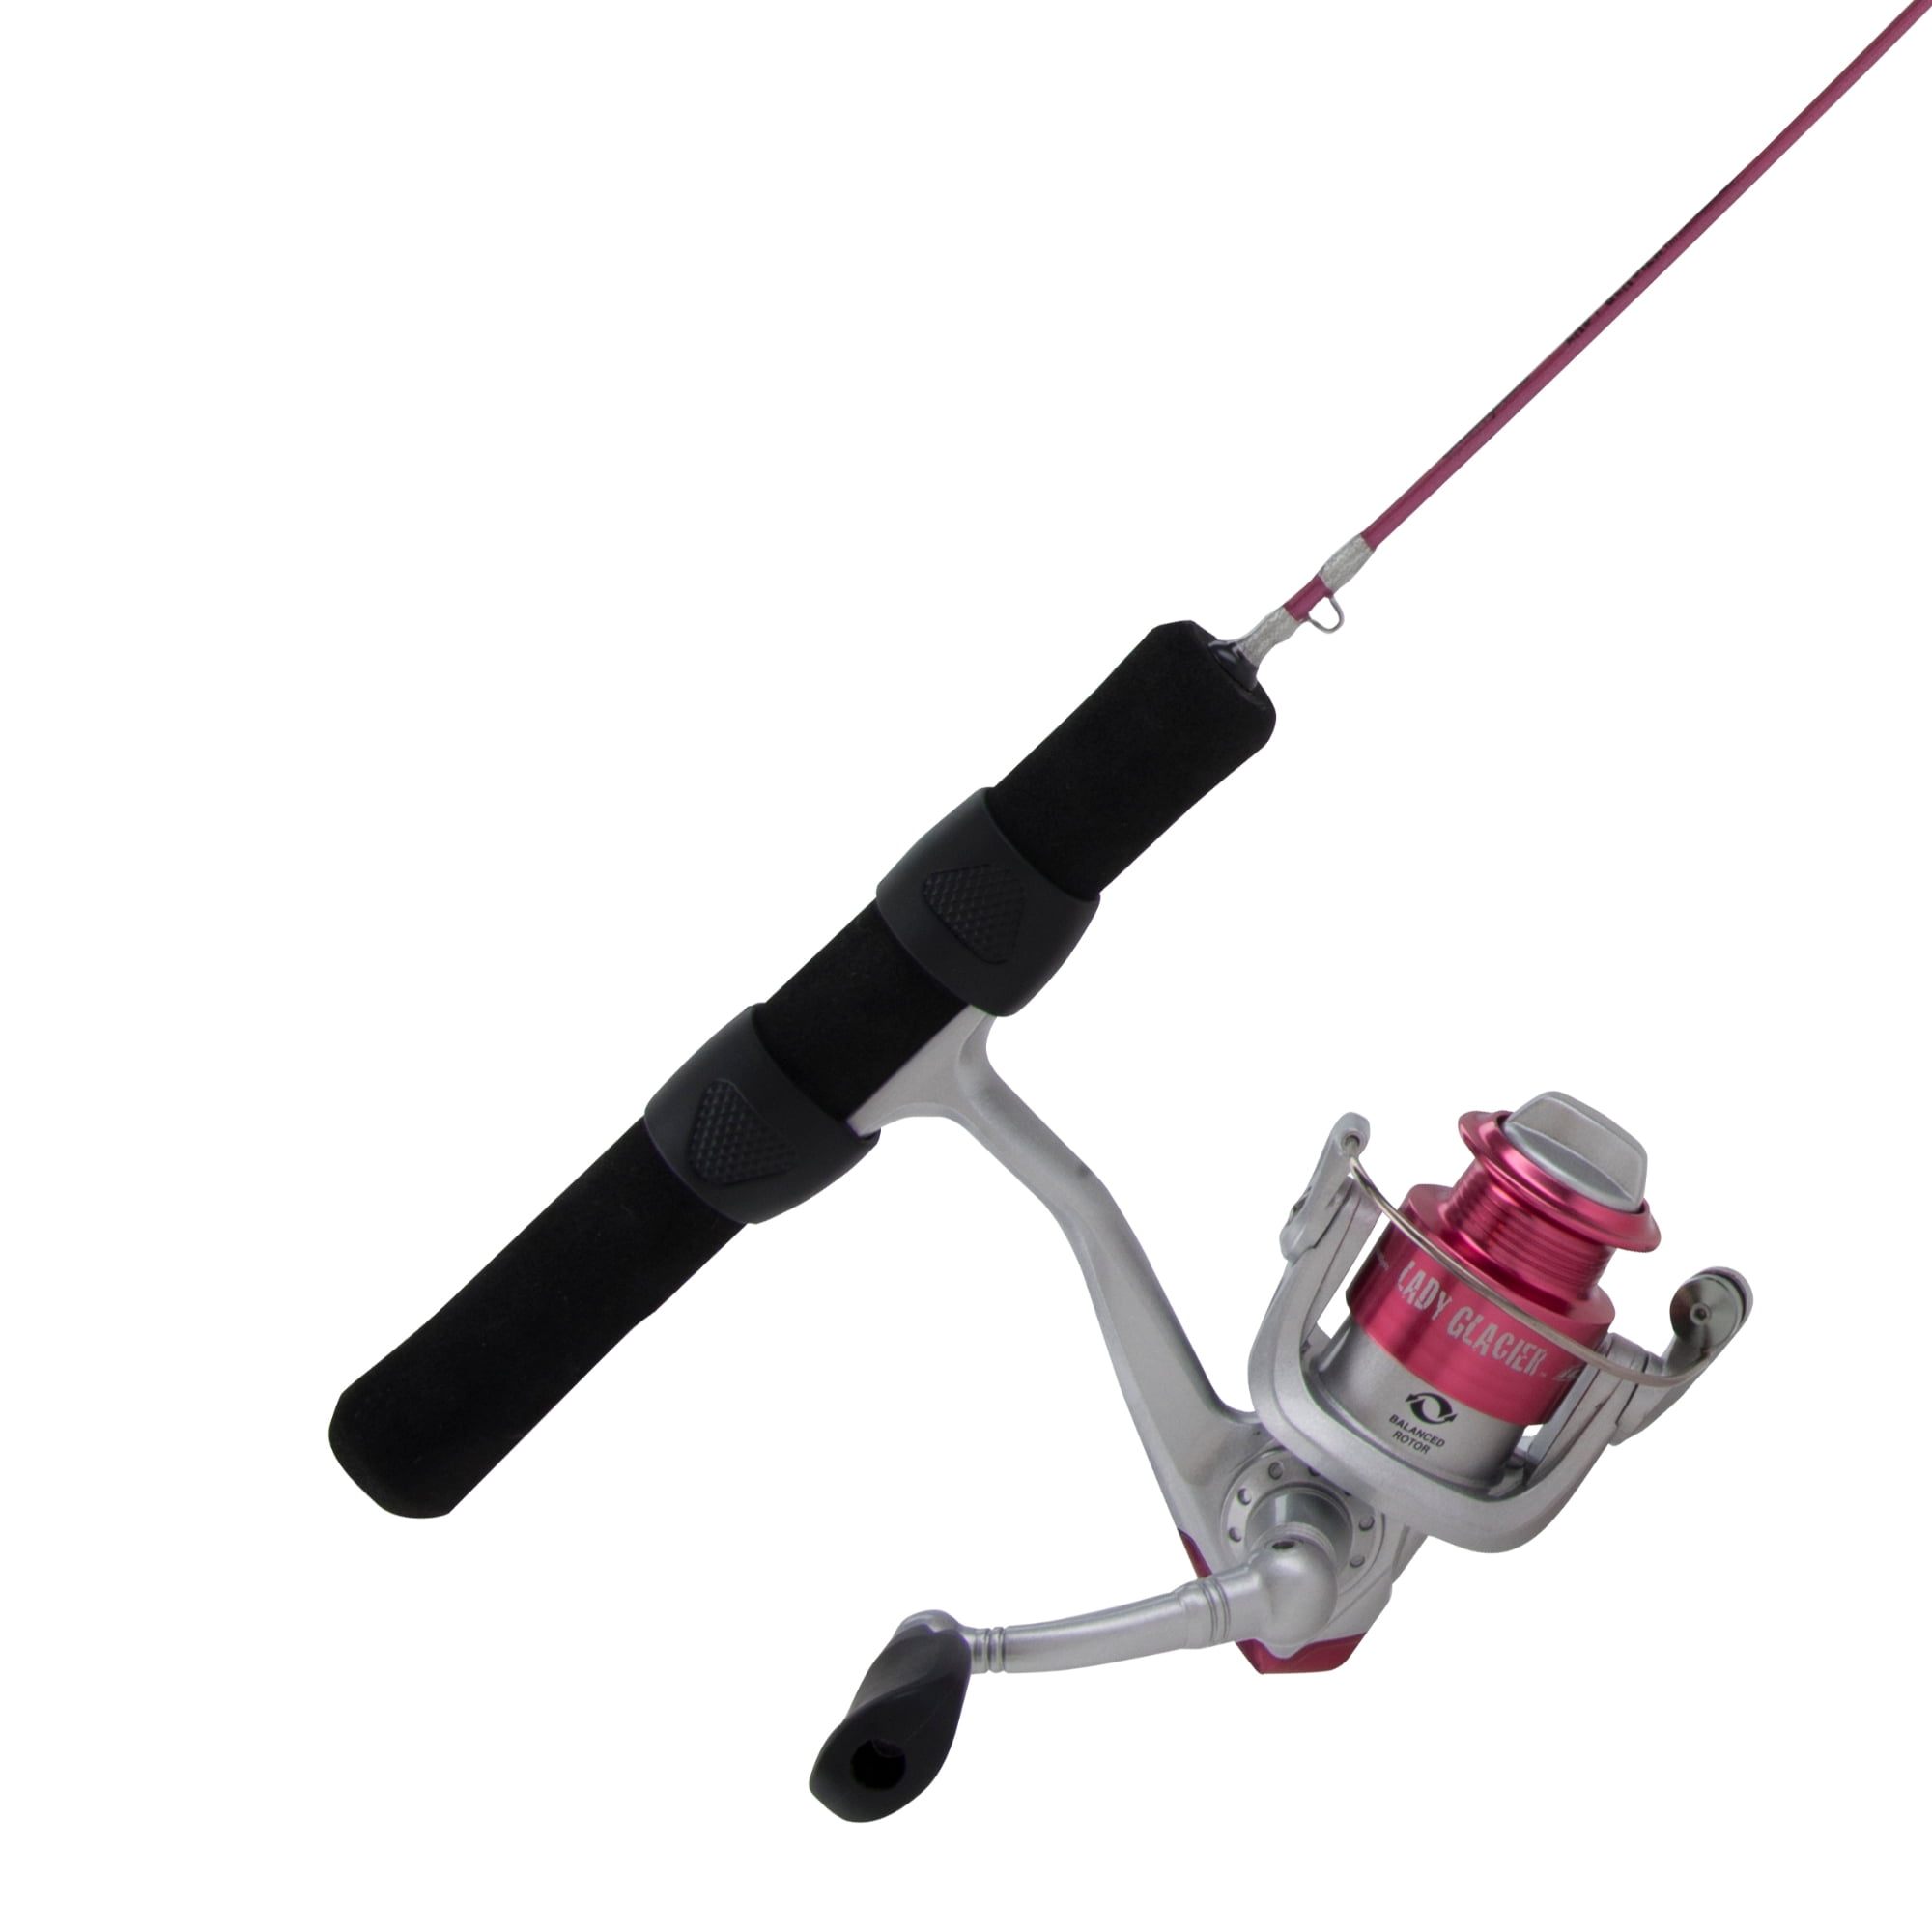 Shakespeare Lady Glacier Ice Fishing Rod and Spinning Reel Combo